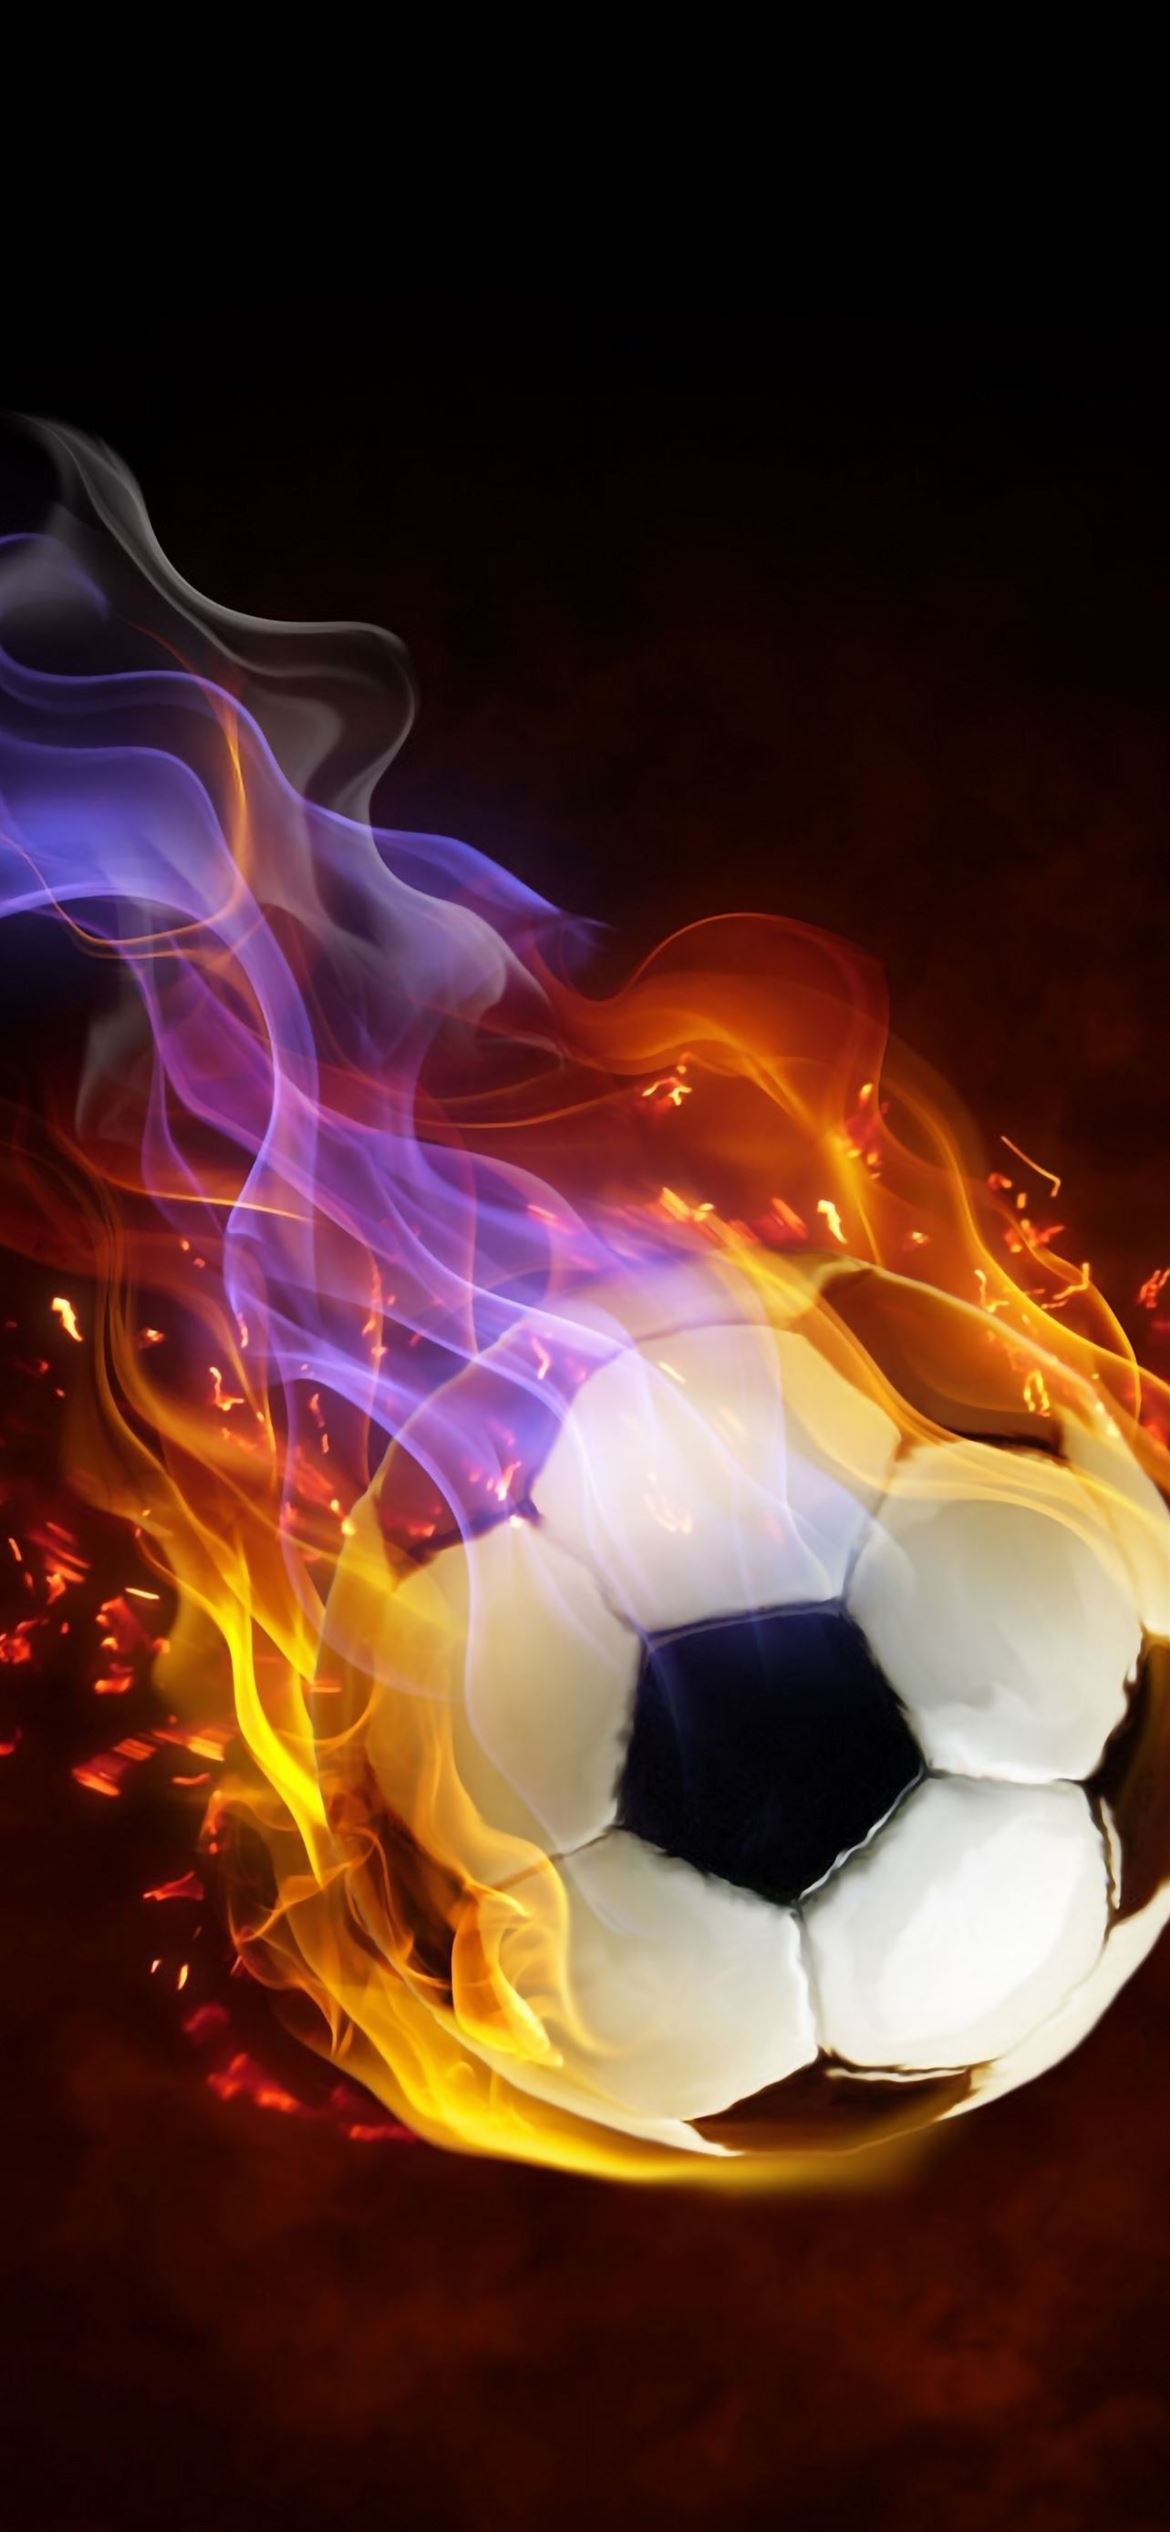 Soccer Ball Photos Download The BEST Free Soccer Ball Stock Photos  HD  Images